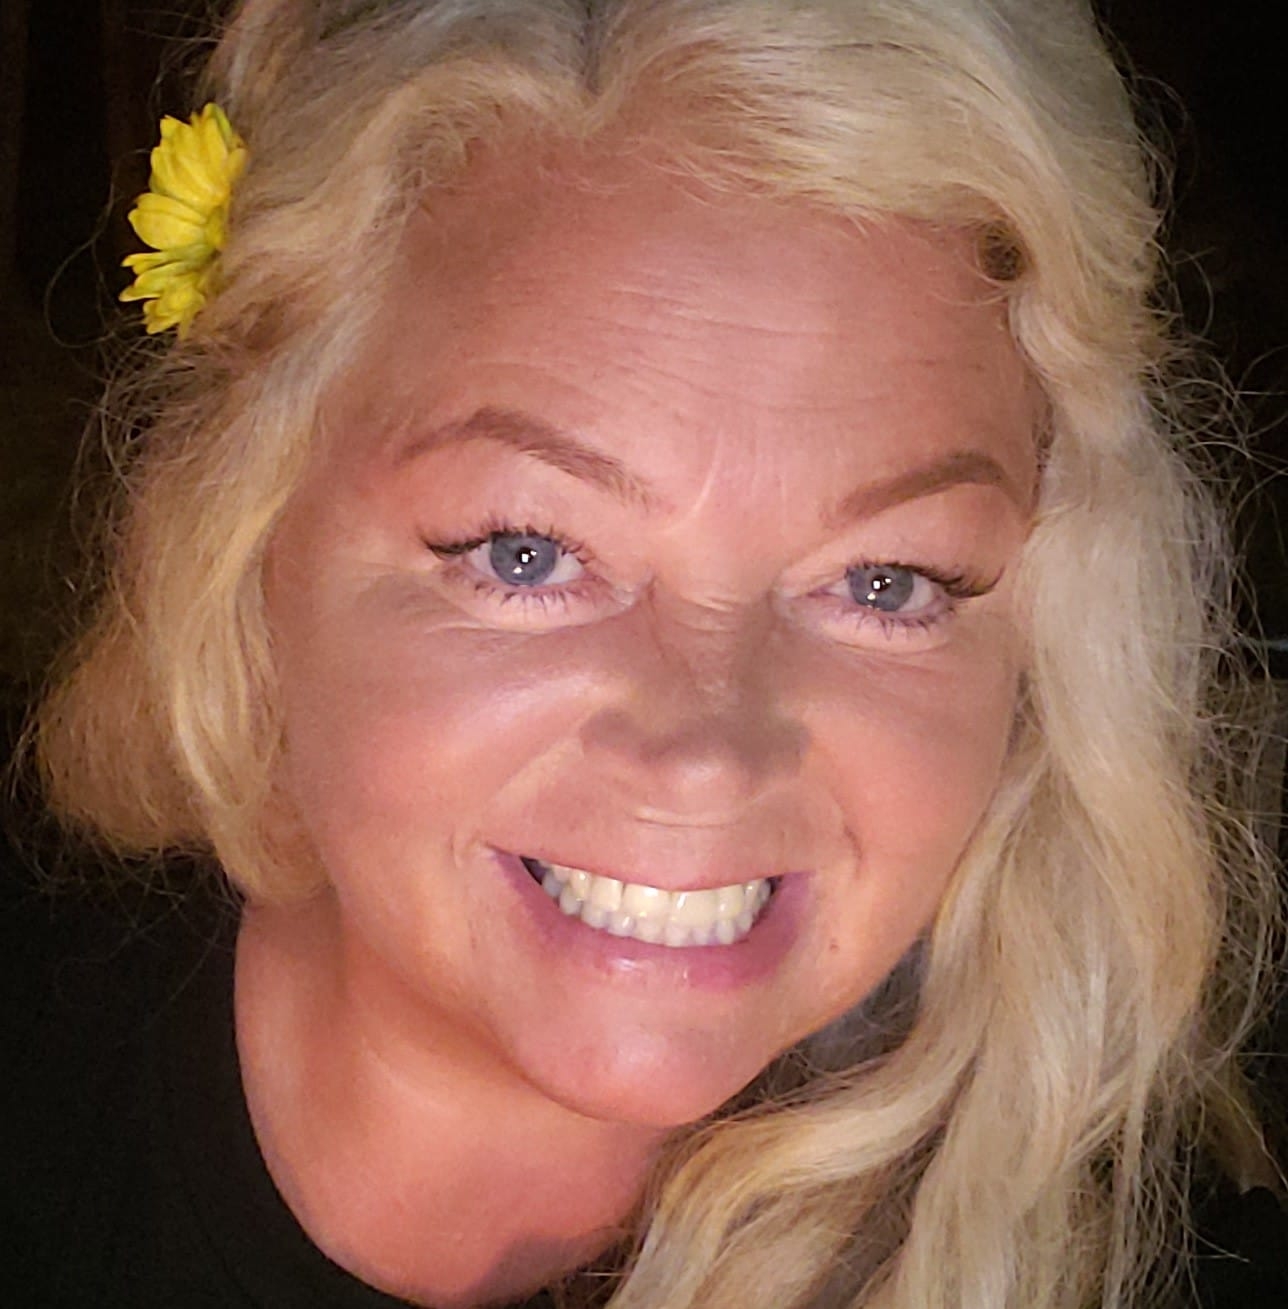 woman with yellow flower in her hair smiling